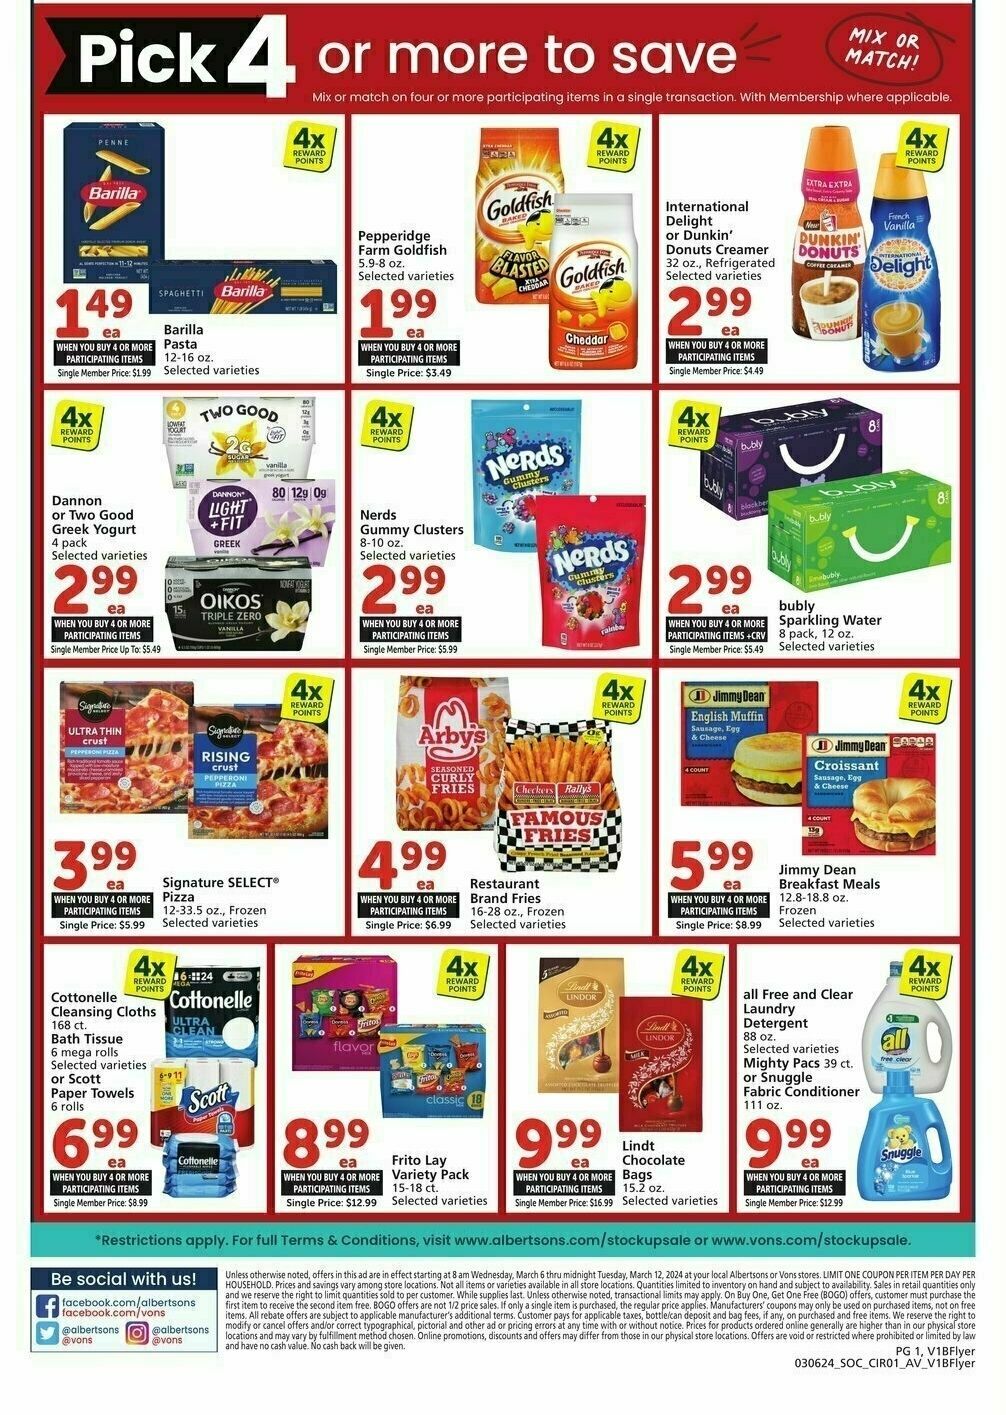 Vons Stock Up Sale Weekly Ad from March 6